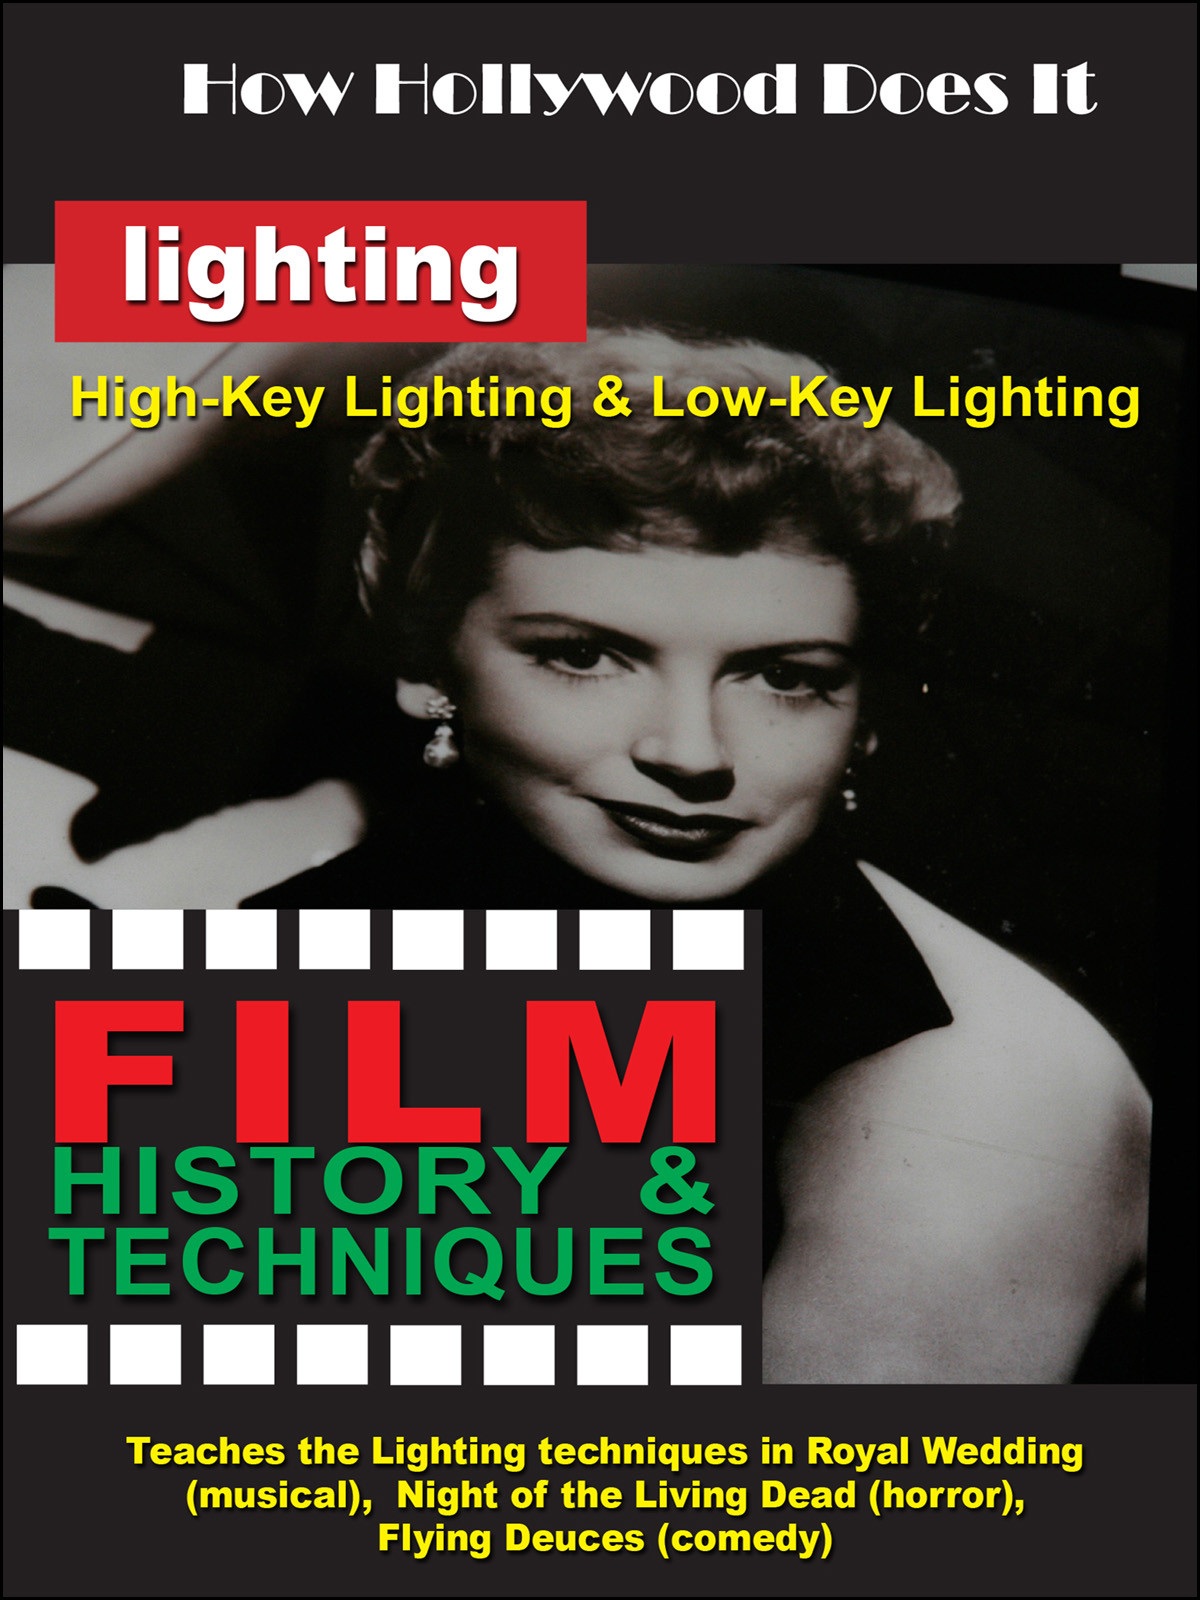 F2717 - How Hollywood Does It - Film History & Techniques of Lighting